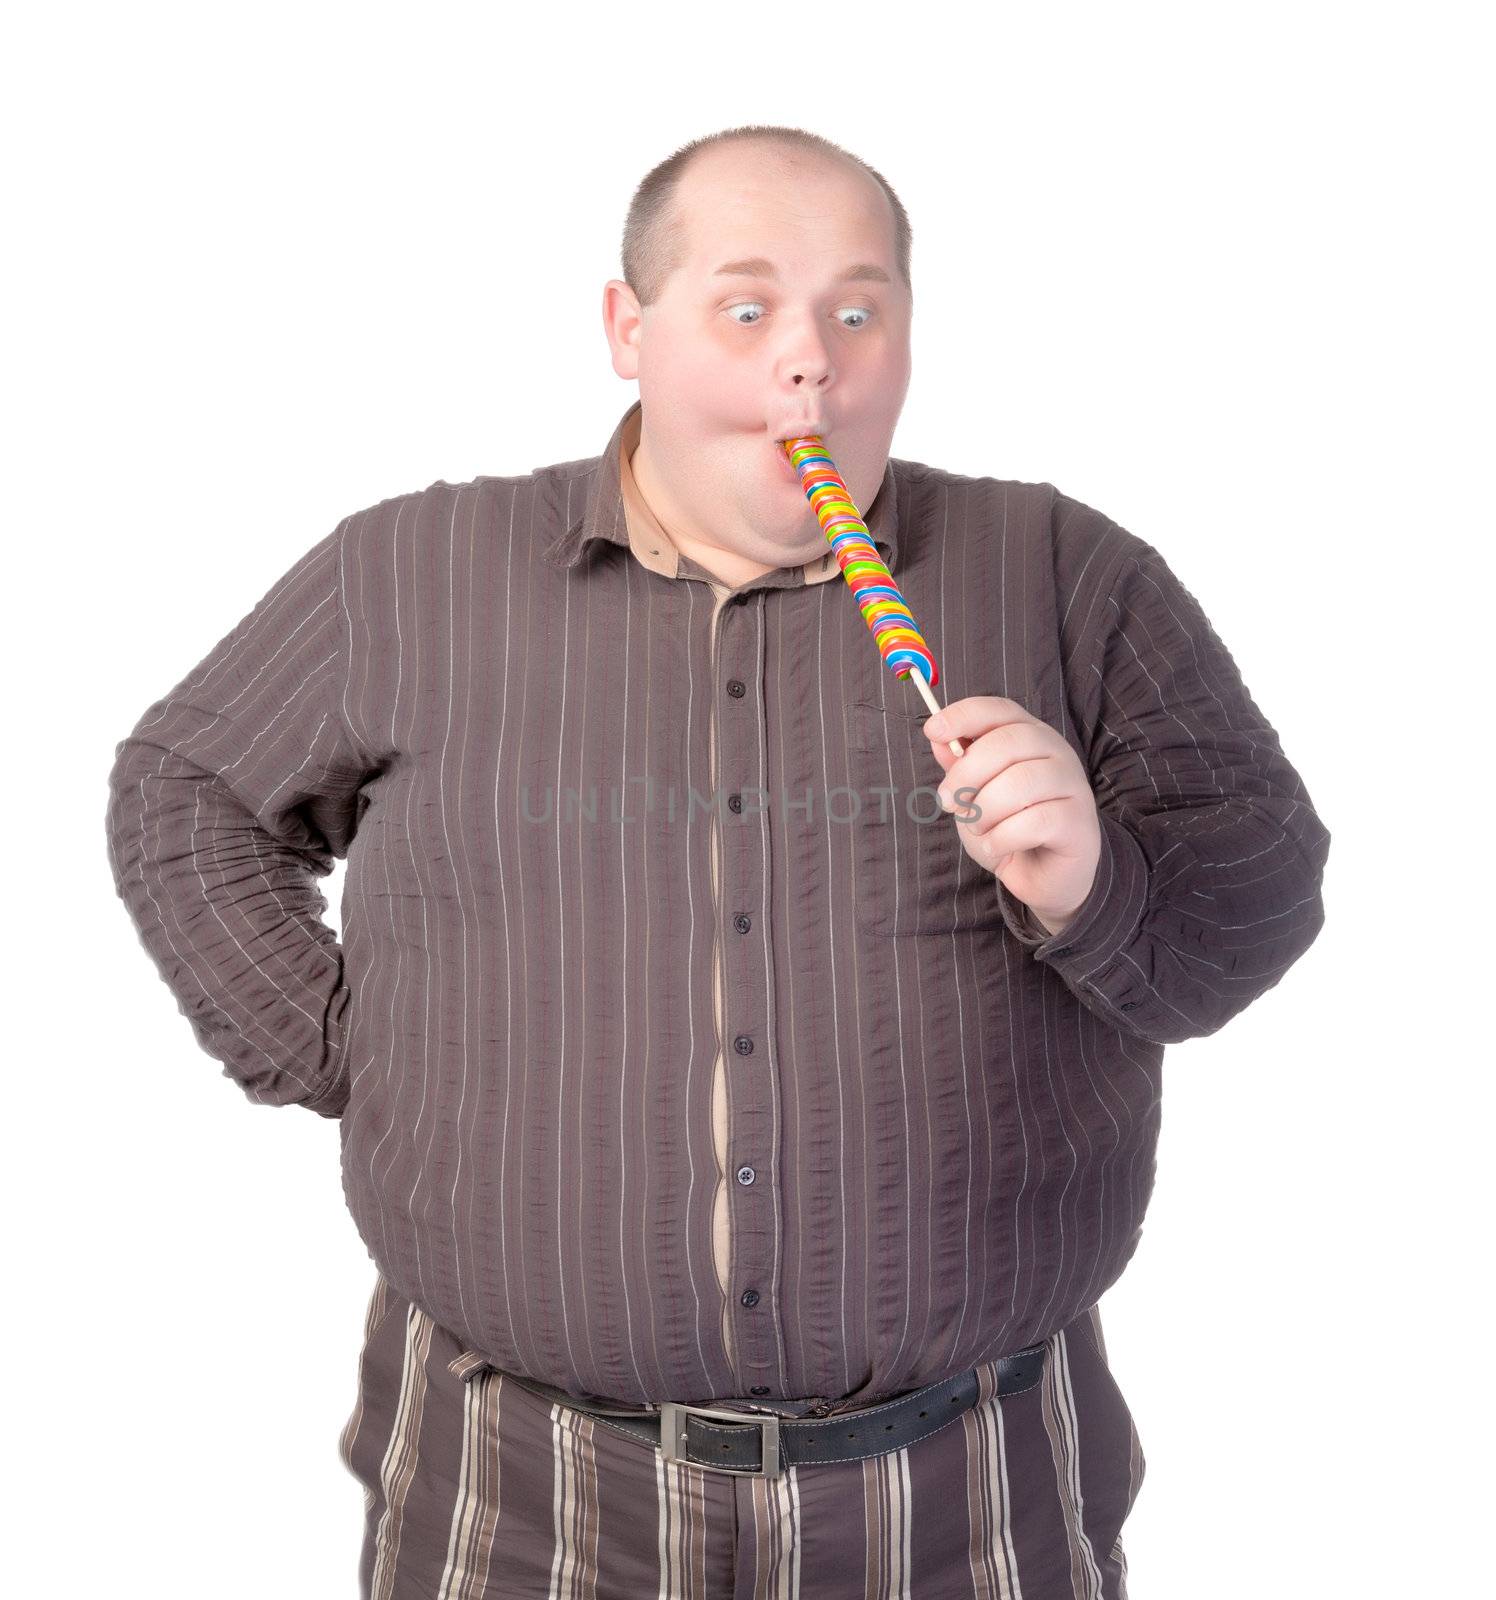 Fat obese man enjoying a a long colourful striped lollipop, standing licking it with a look of complete absorption totally oblivious to his surroundings